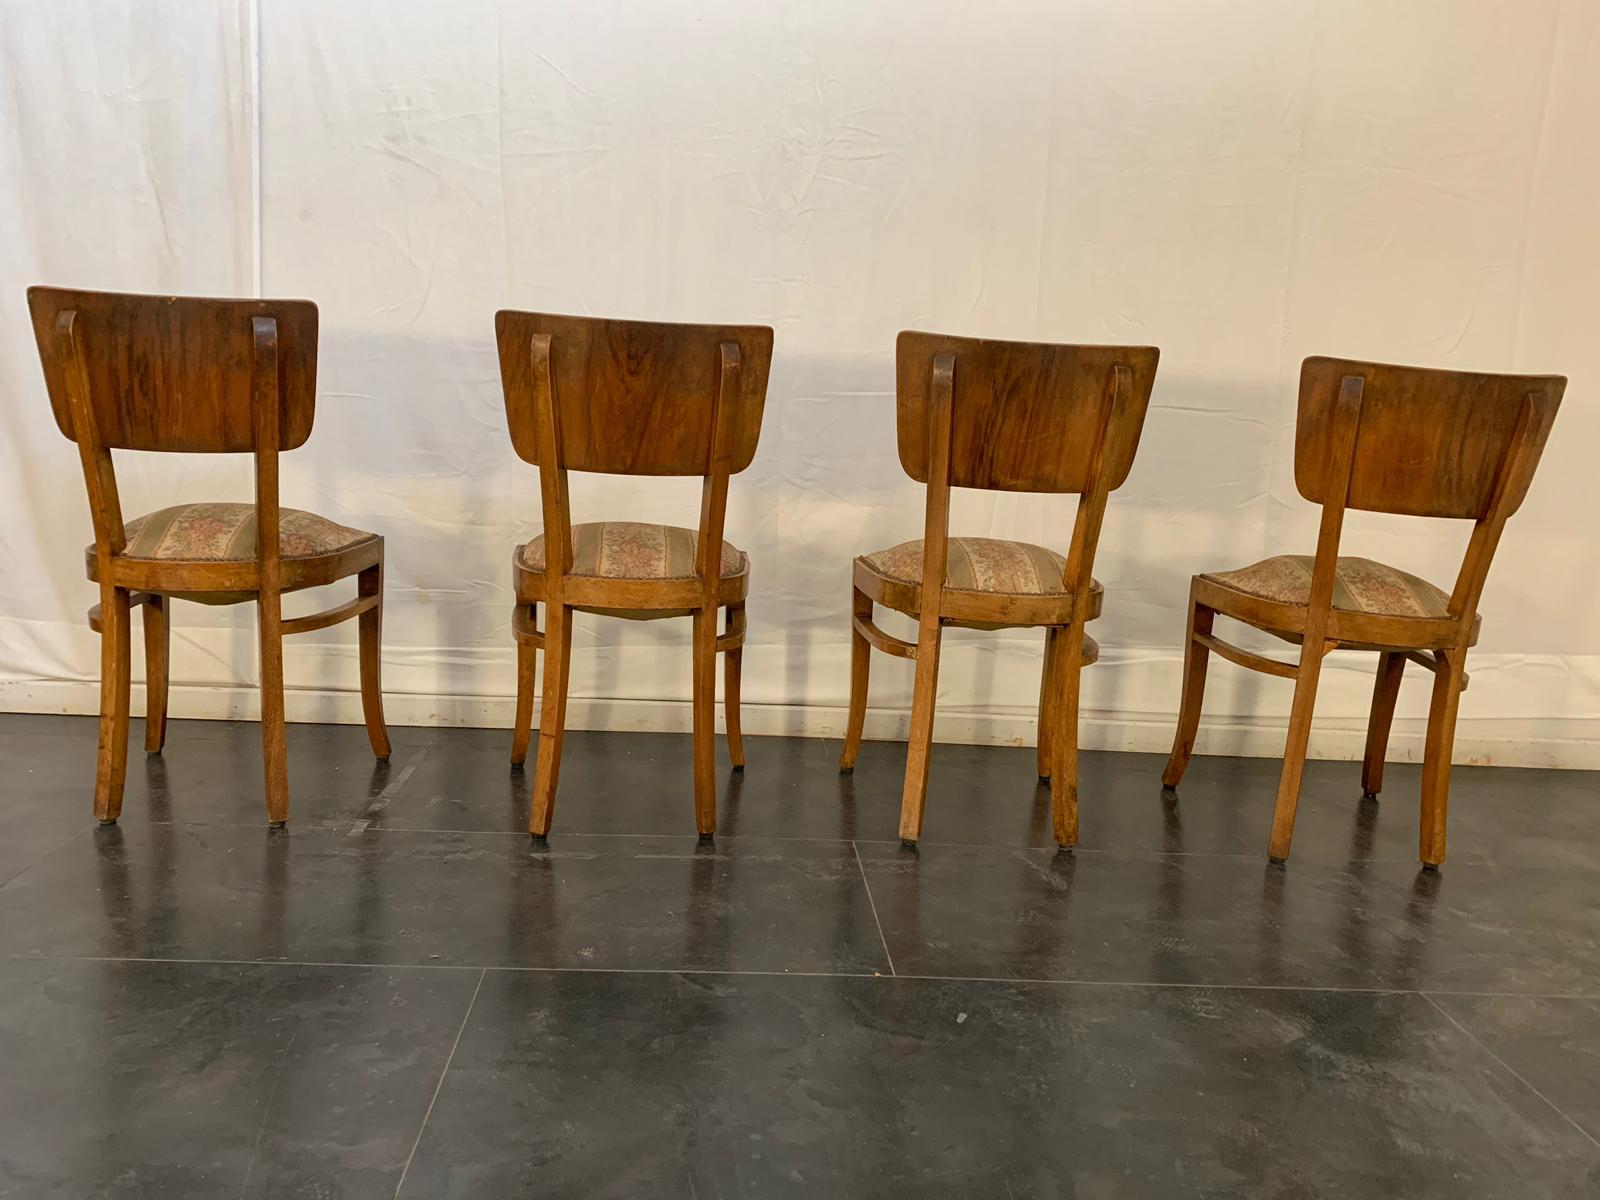 4 Art Deco chairs in rosewood. Light wear and tear due to age and use. Replacement of upholstery recommended. Patina due to age and use.
Packaging with bubble wrap and cardboard boxes is included. If the wooden packaging is needed (fumigated crates